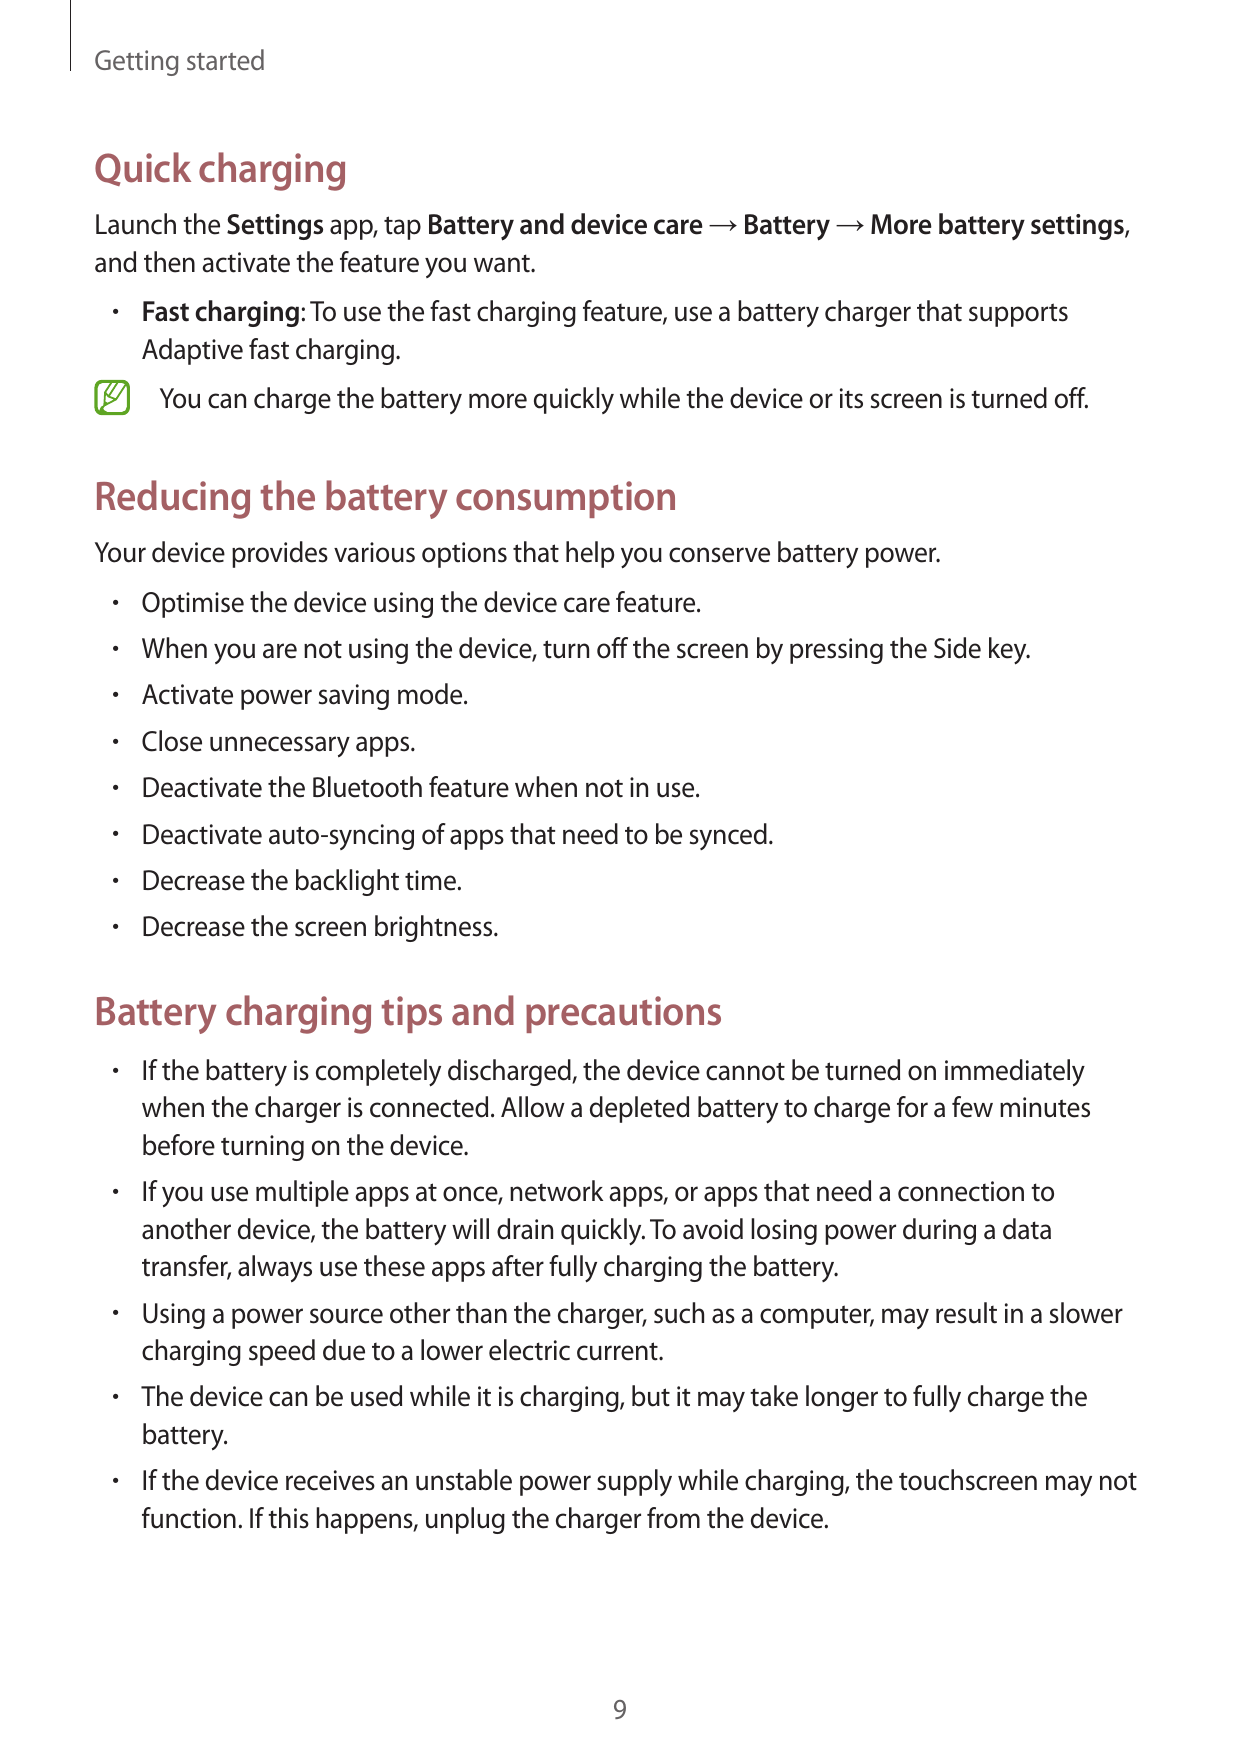 Getting startedQuick chargingLaunch the Settings app, tap Battery and device care → Battery → More battery settings,and then act